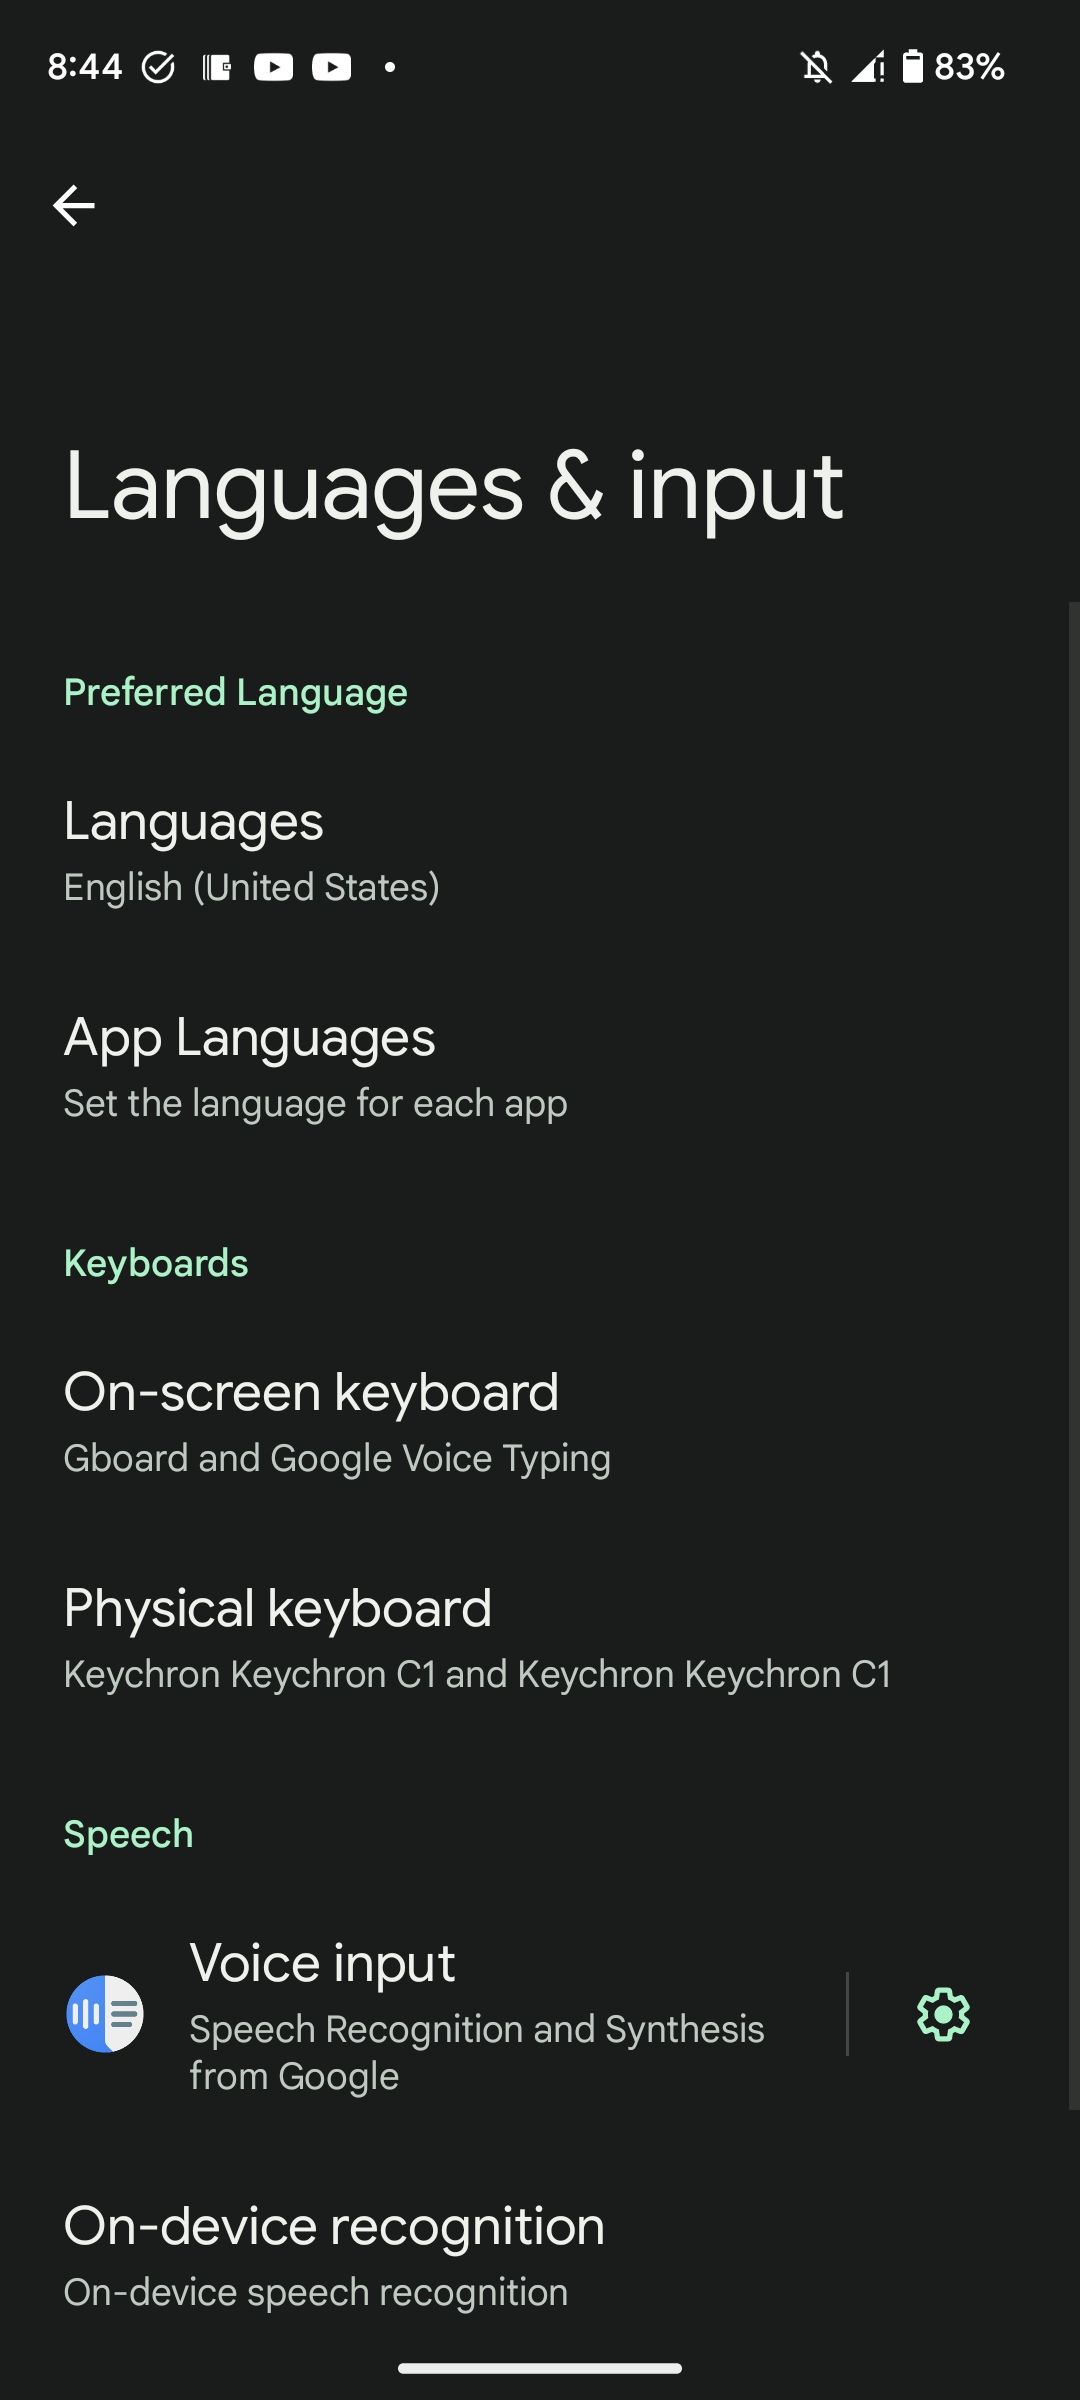 Languages & input page in Android